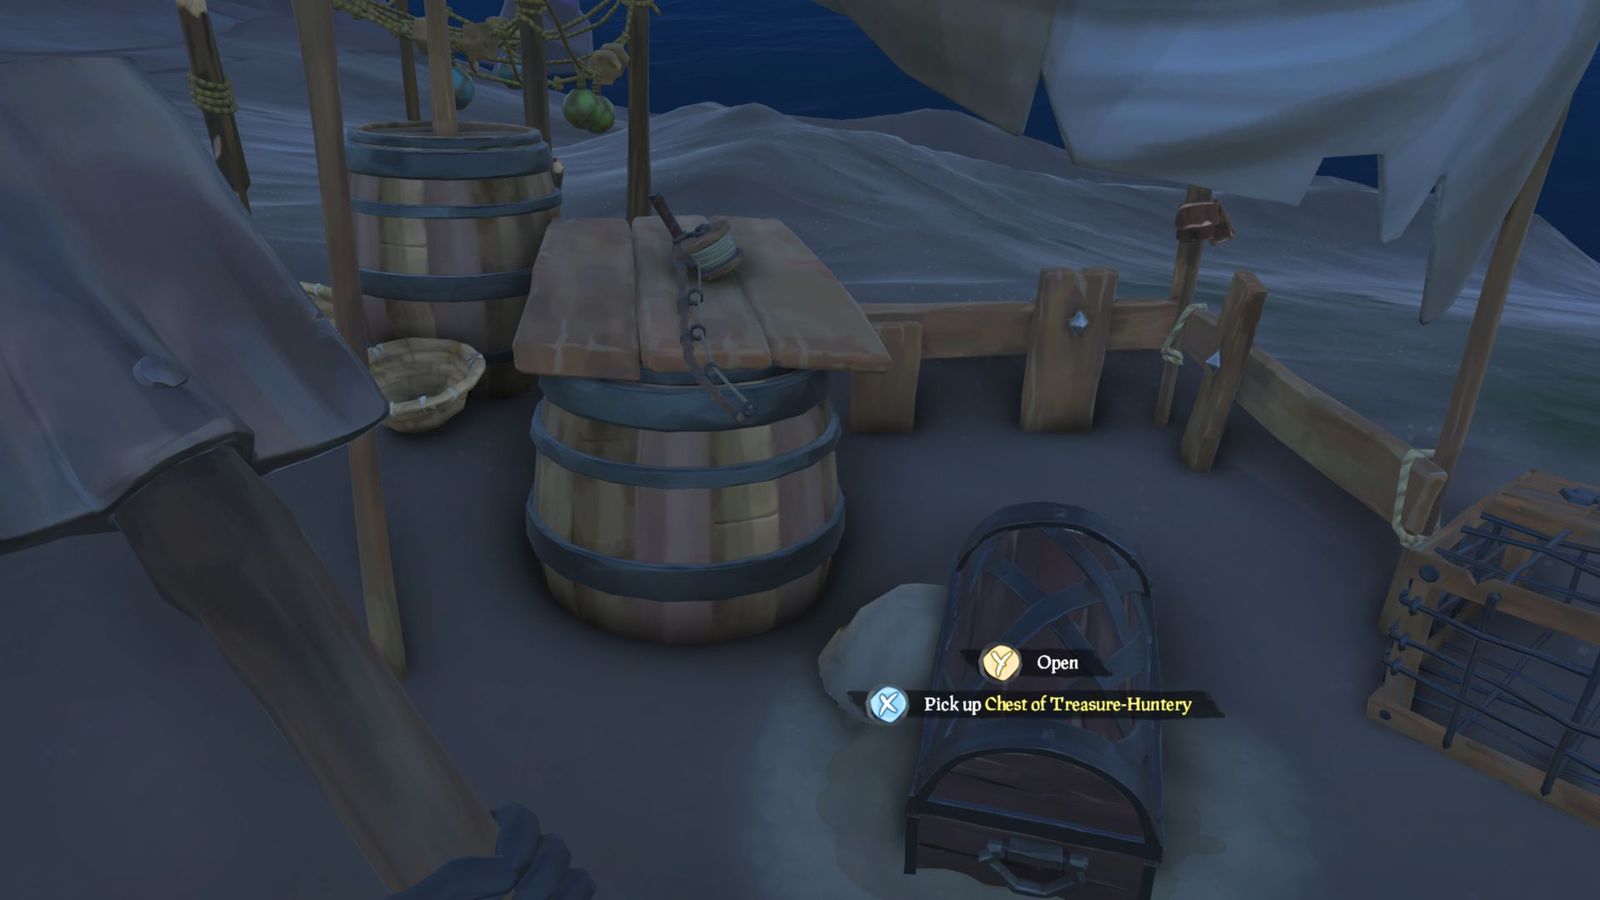 Sea of Thieves Trial of Treasure-huntery chest two location